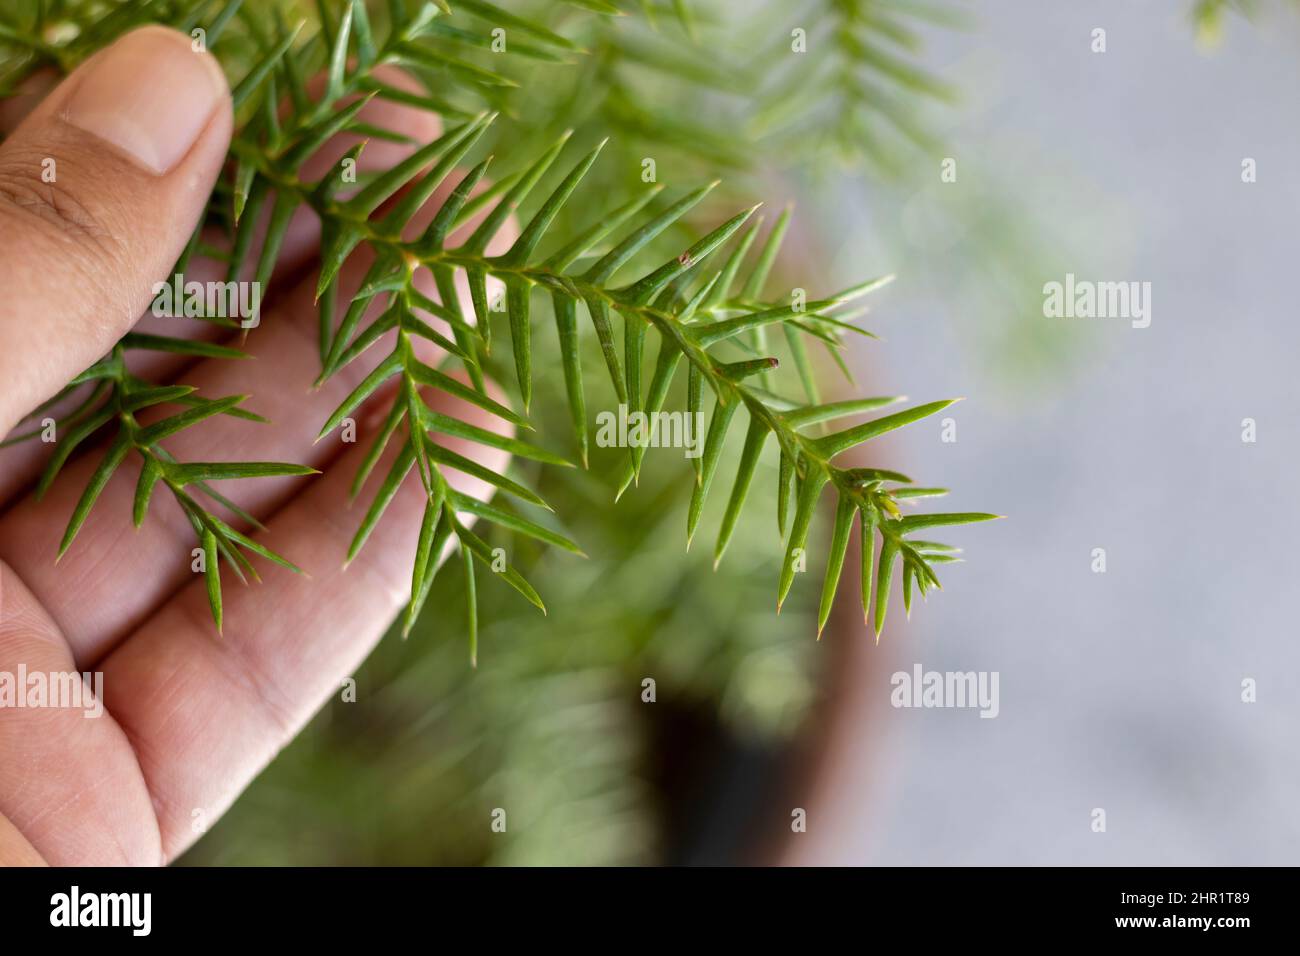 Holding branch of Arucaria colonial pine in hand Stock Photo